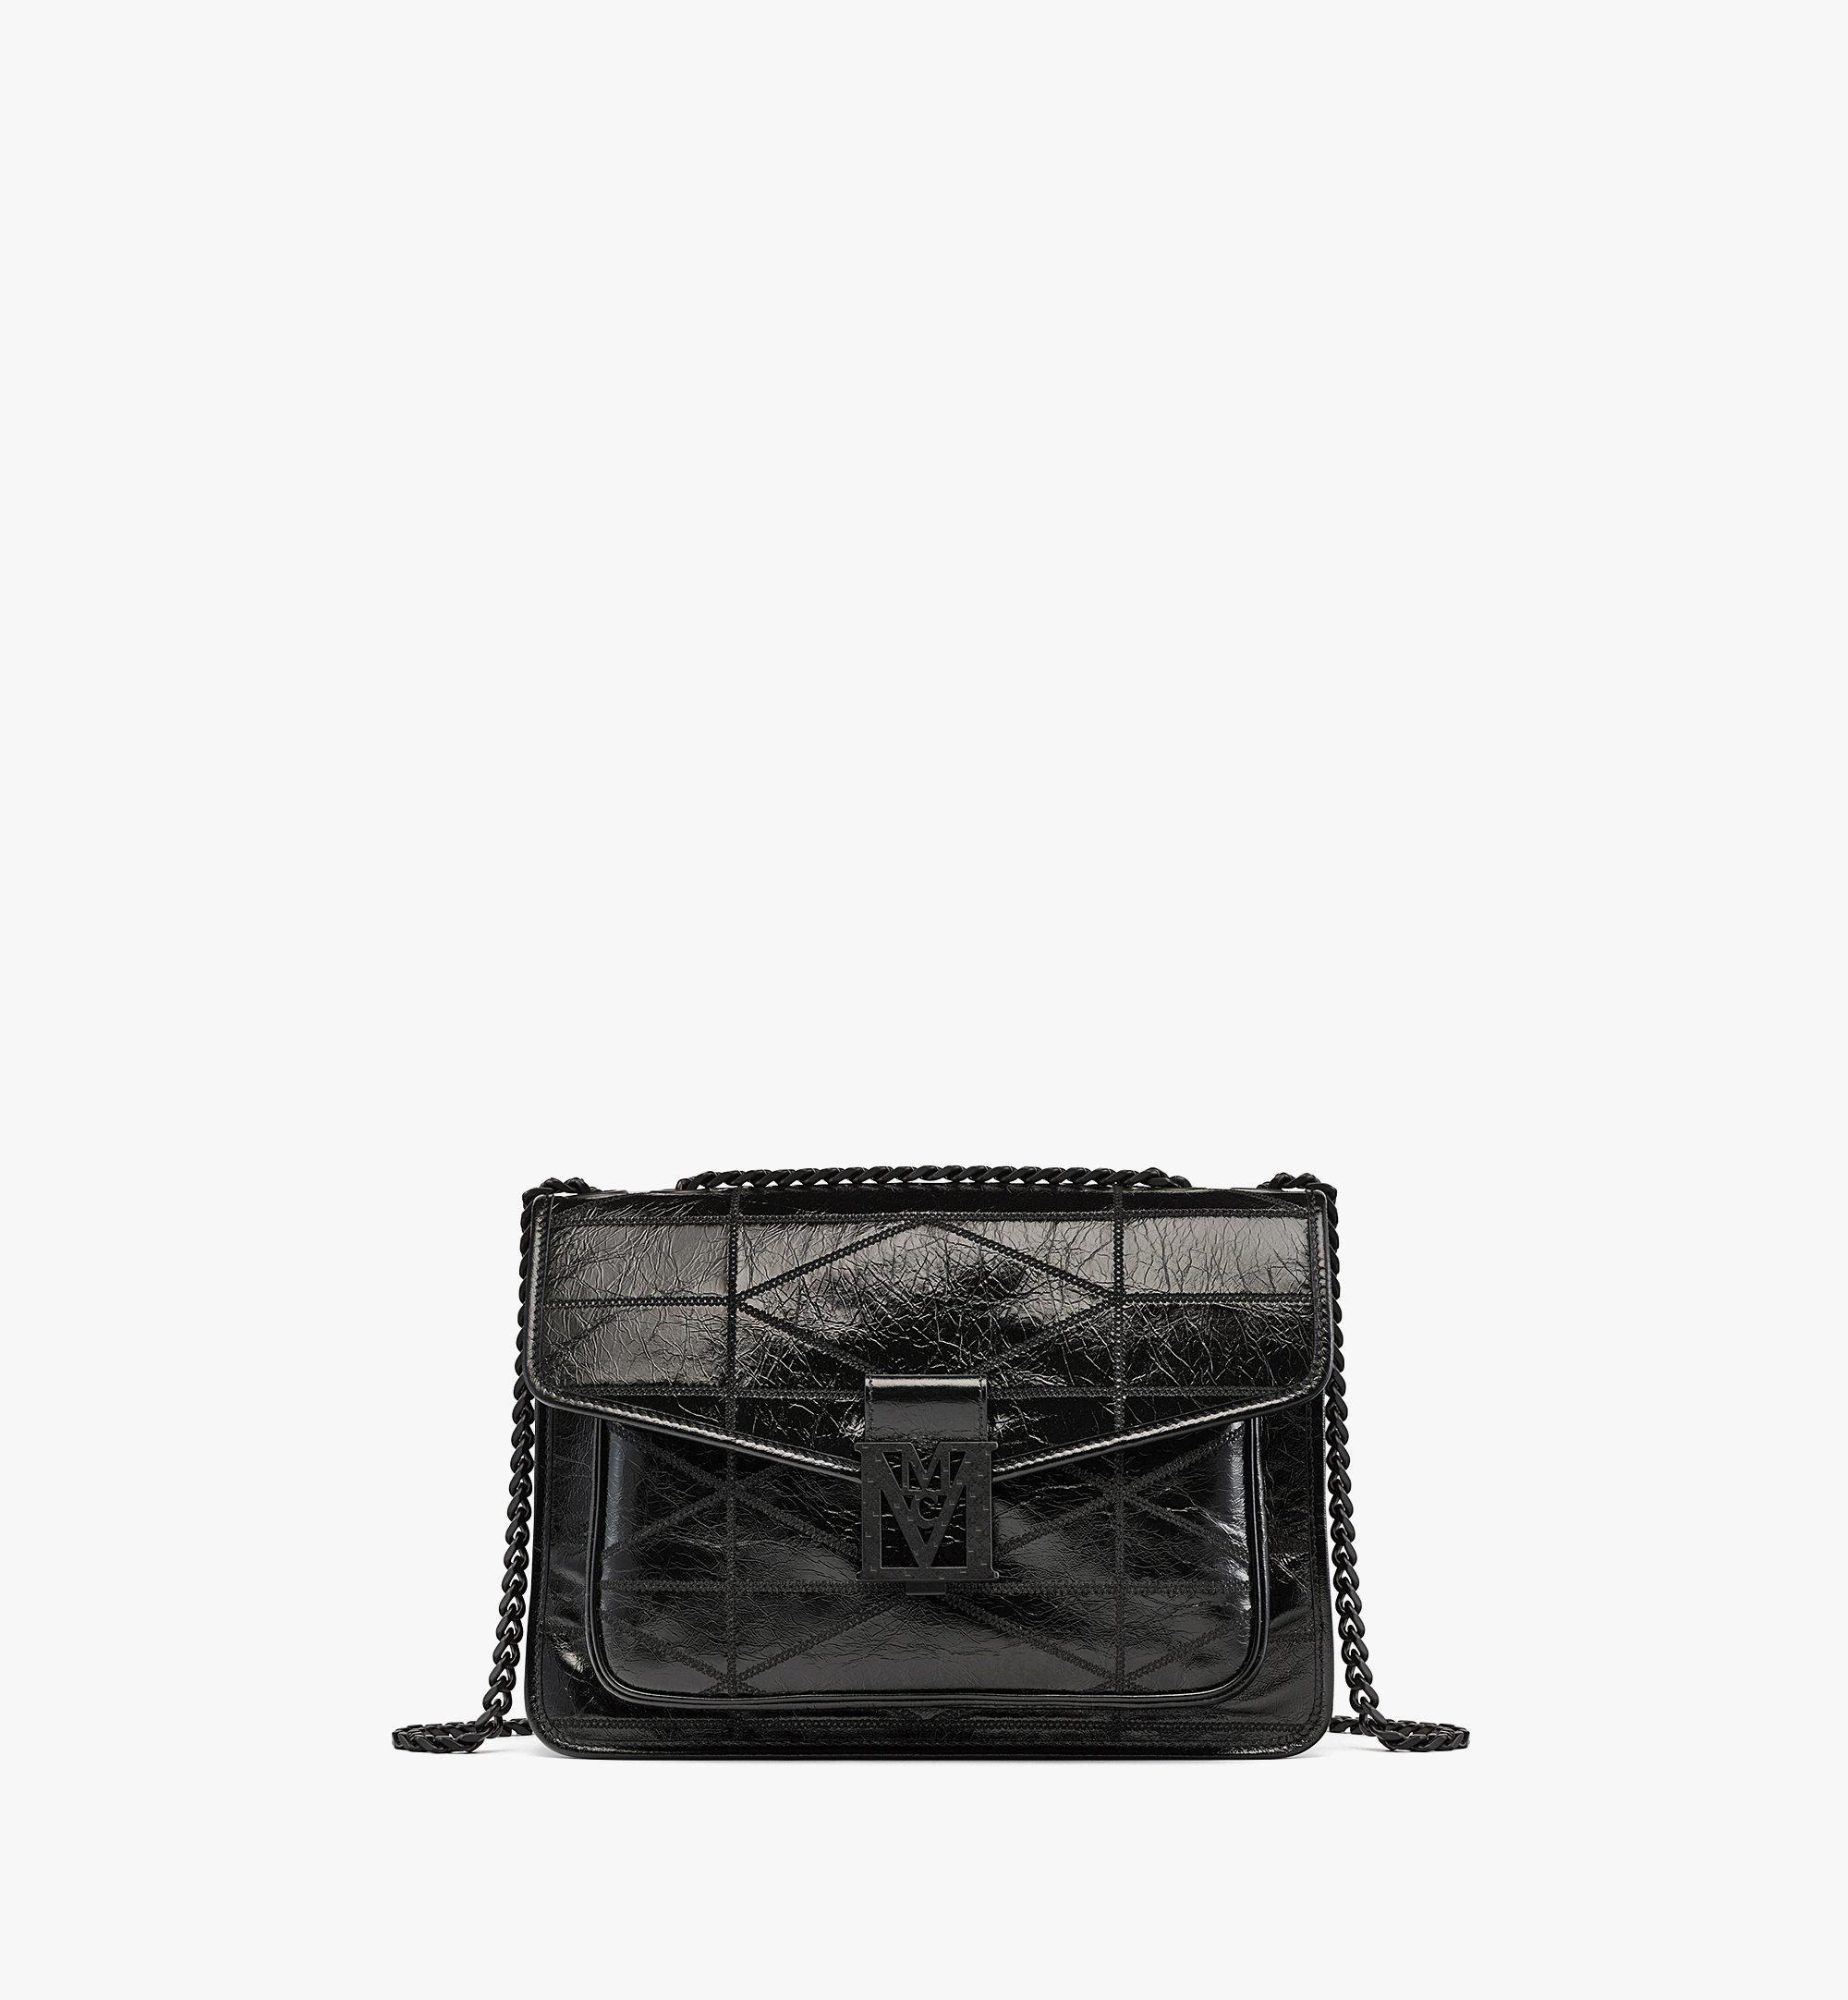 Mcm Travia Quilted Shoulder Bag in Crushed Leather Black Leather